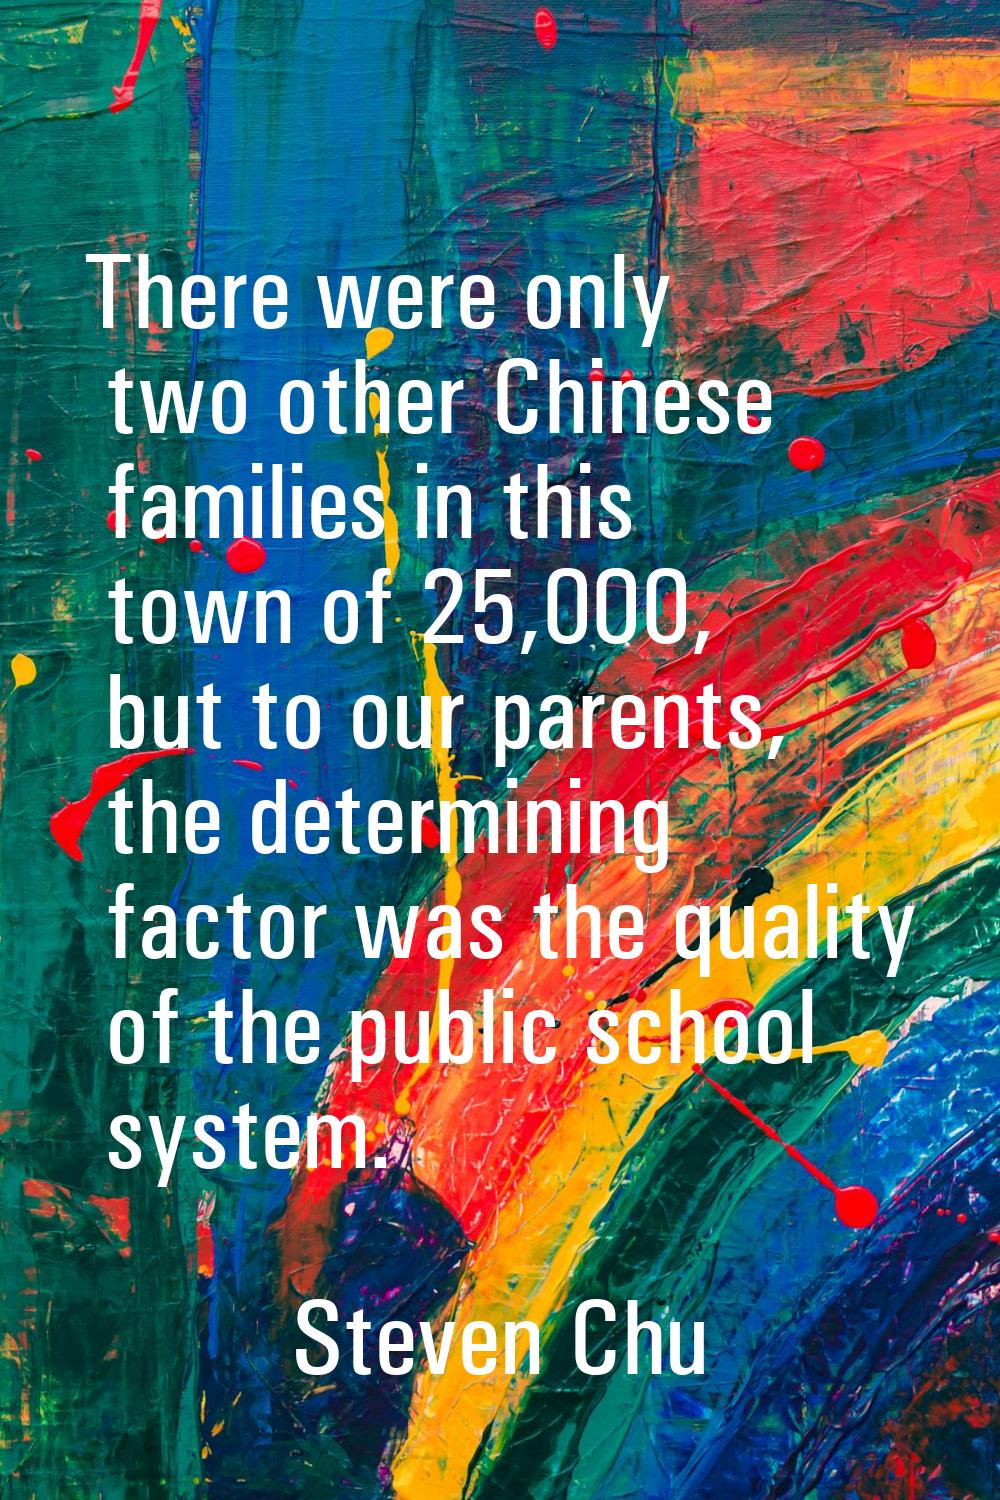 There were only two other Chinese families in this town of 25,000, but to our parents, the determin